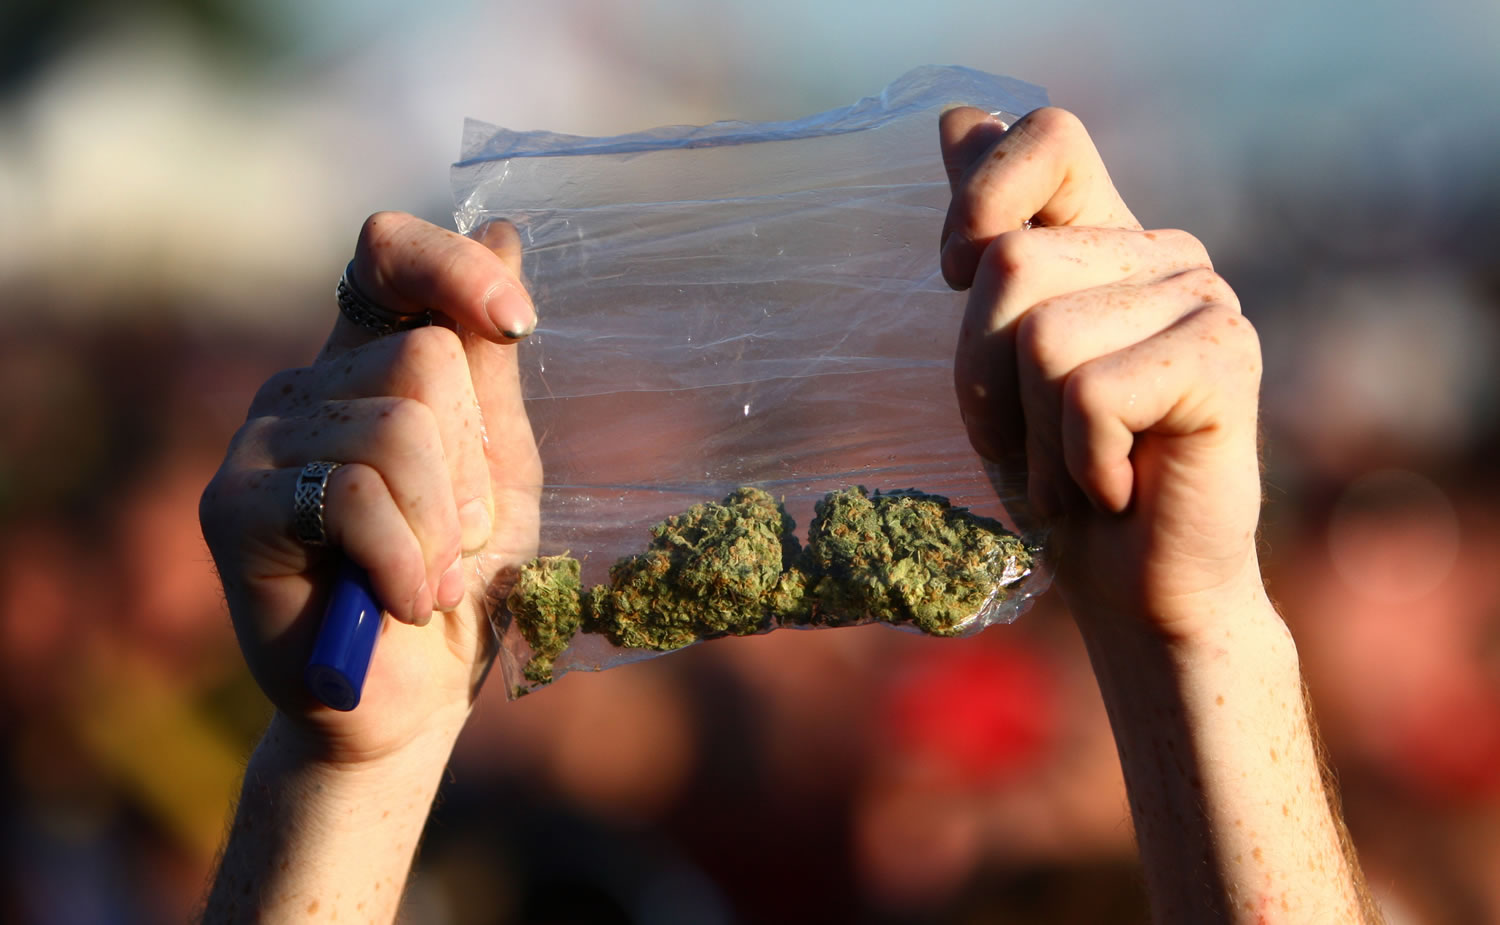 A participant holds up a bag of marijuana during the first day of Hempfest in 2011.